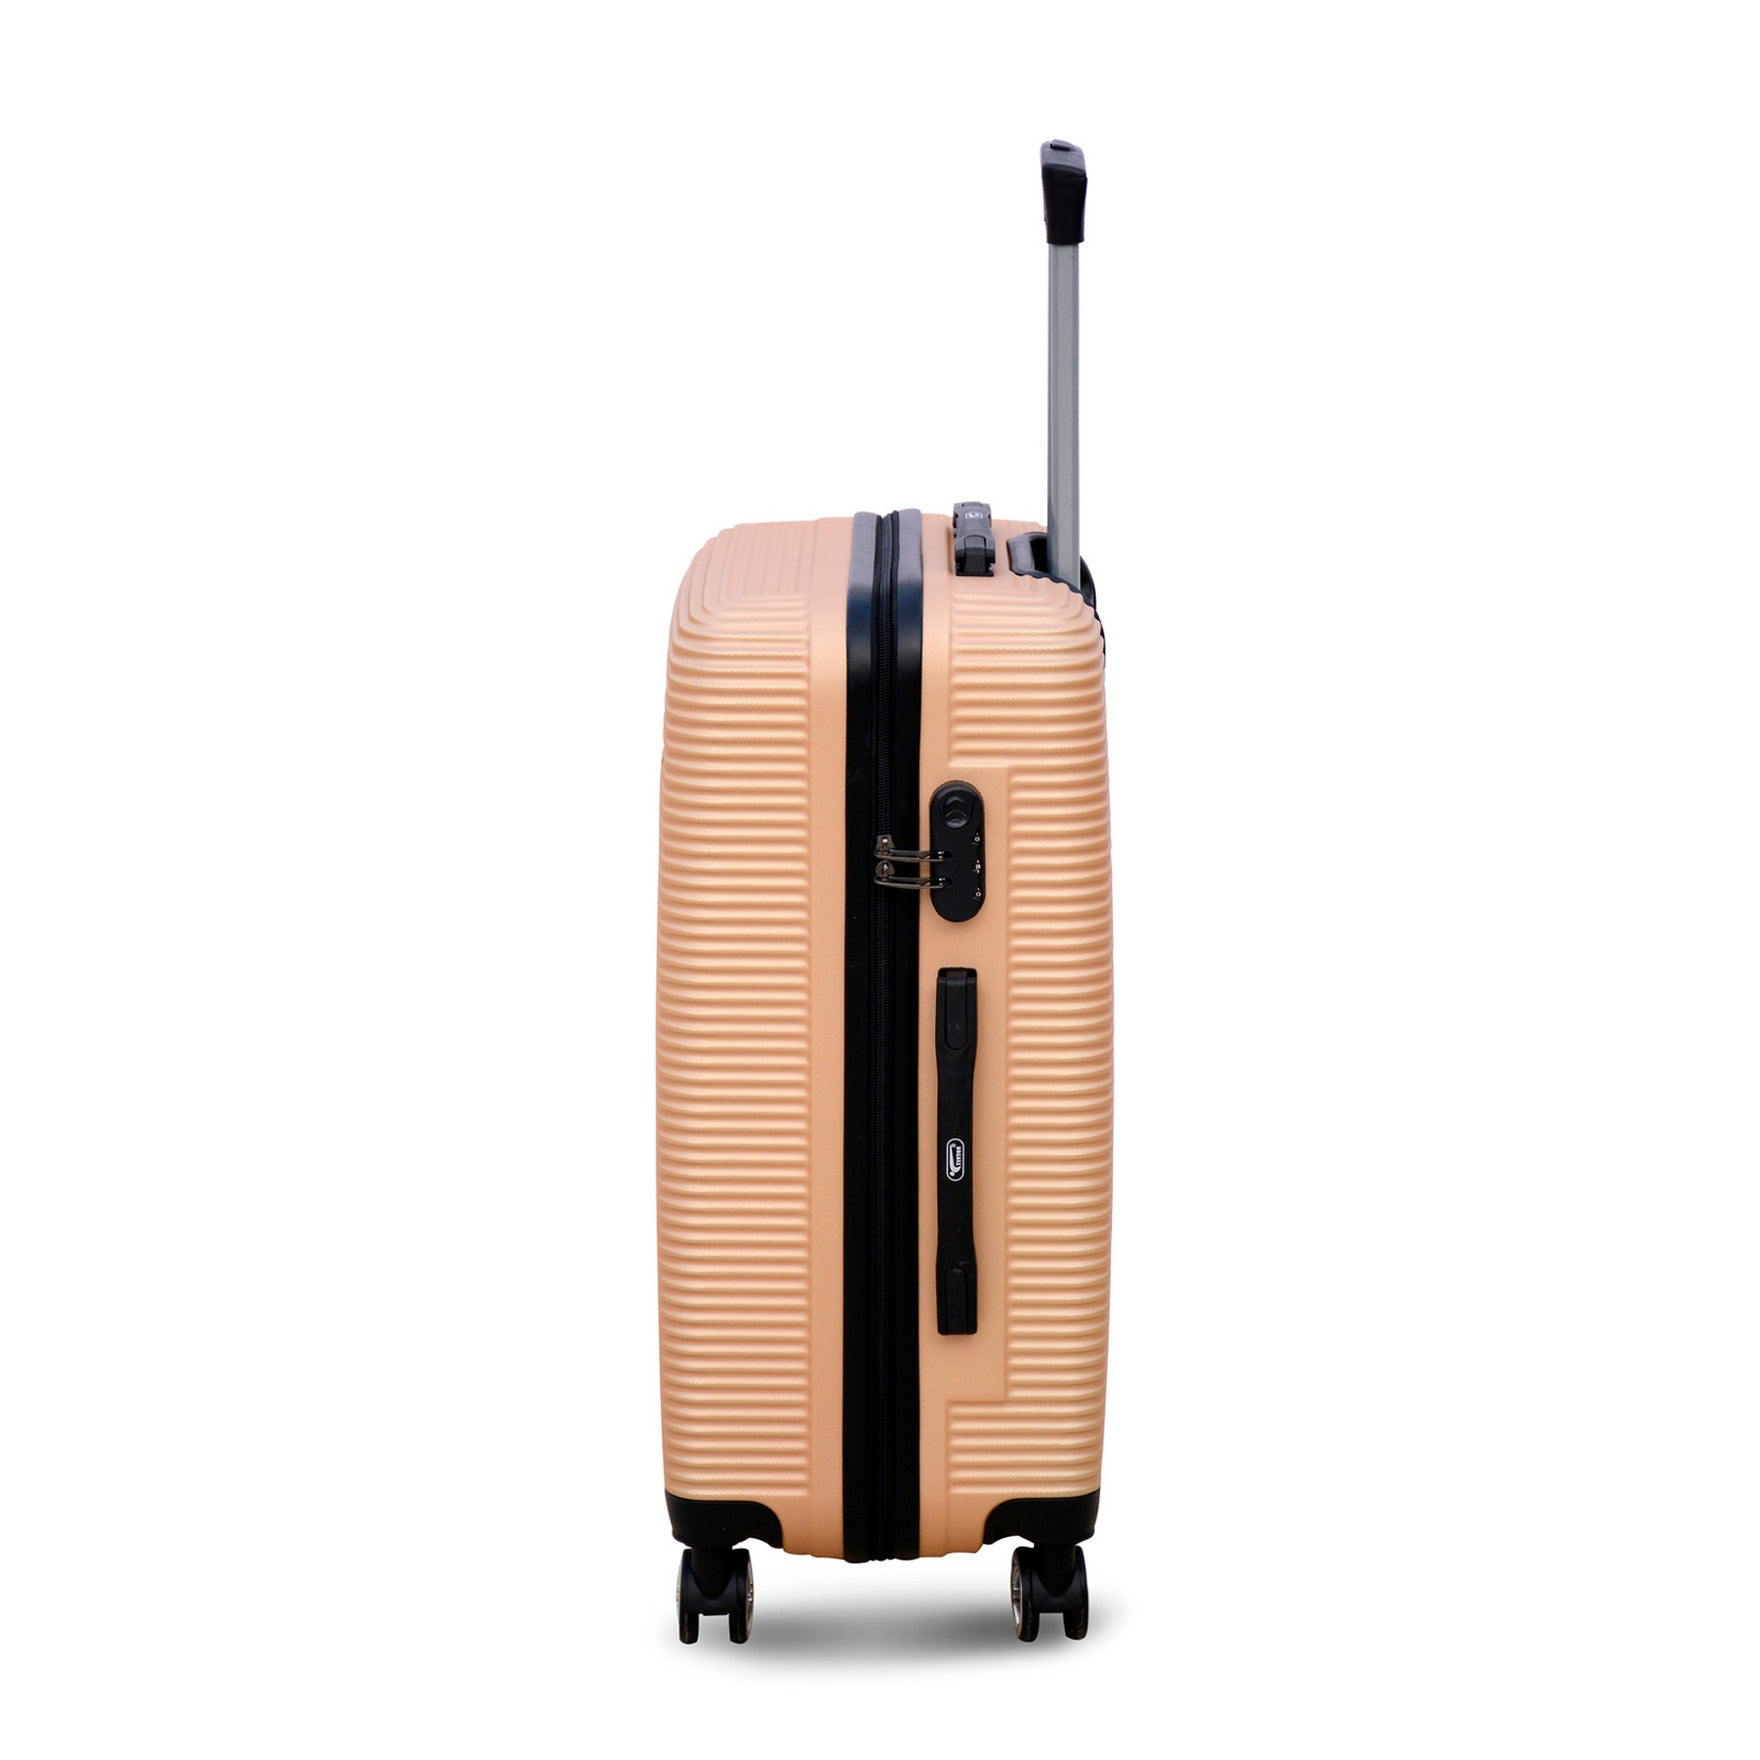 24" Gold Colour JIAN ABS Line Luggage Lightweight Hard Case Trolley Bag With Spinner Wheel